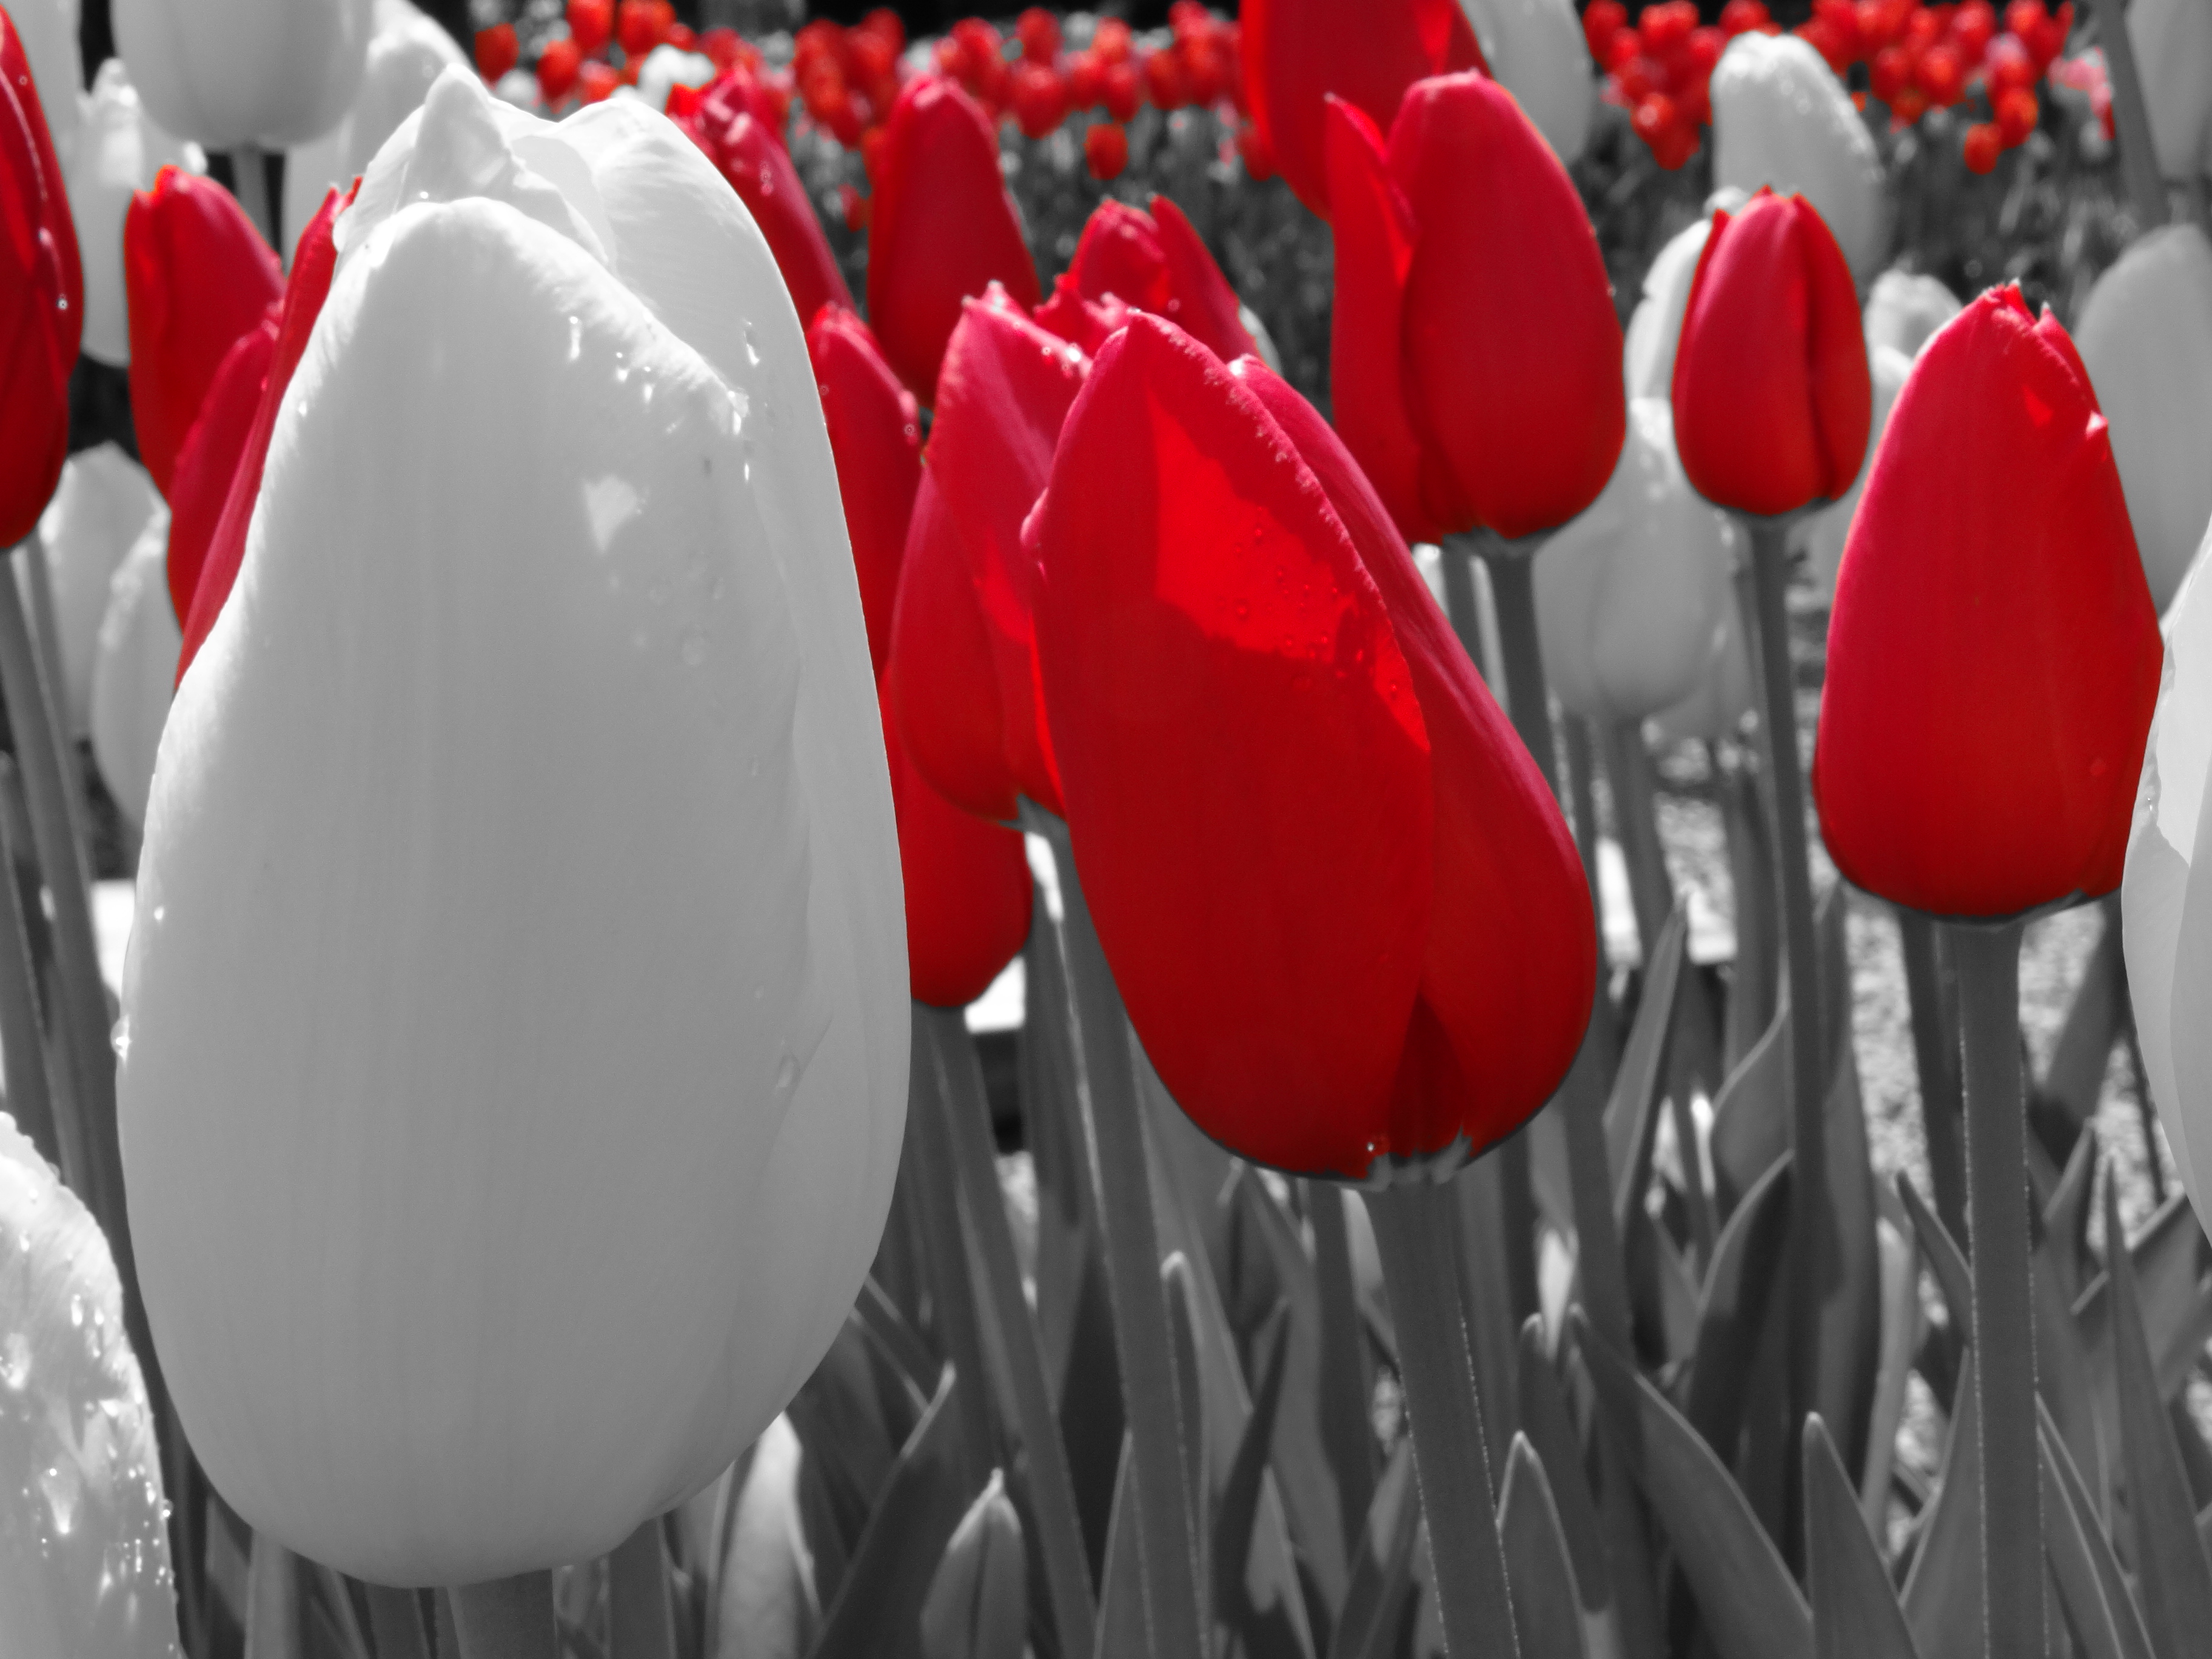 White and red tulips photo